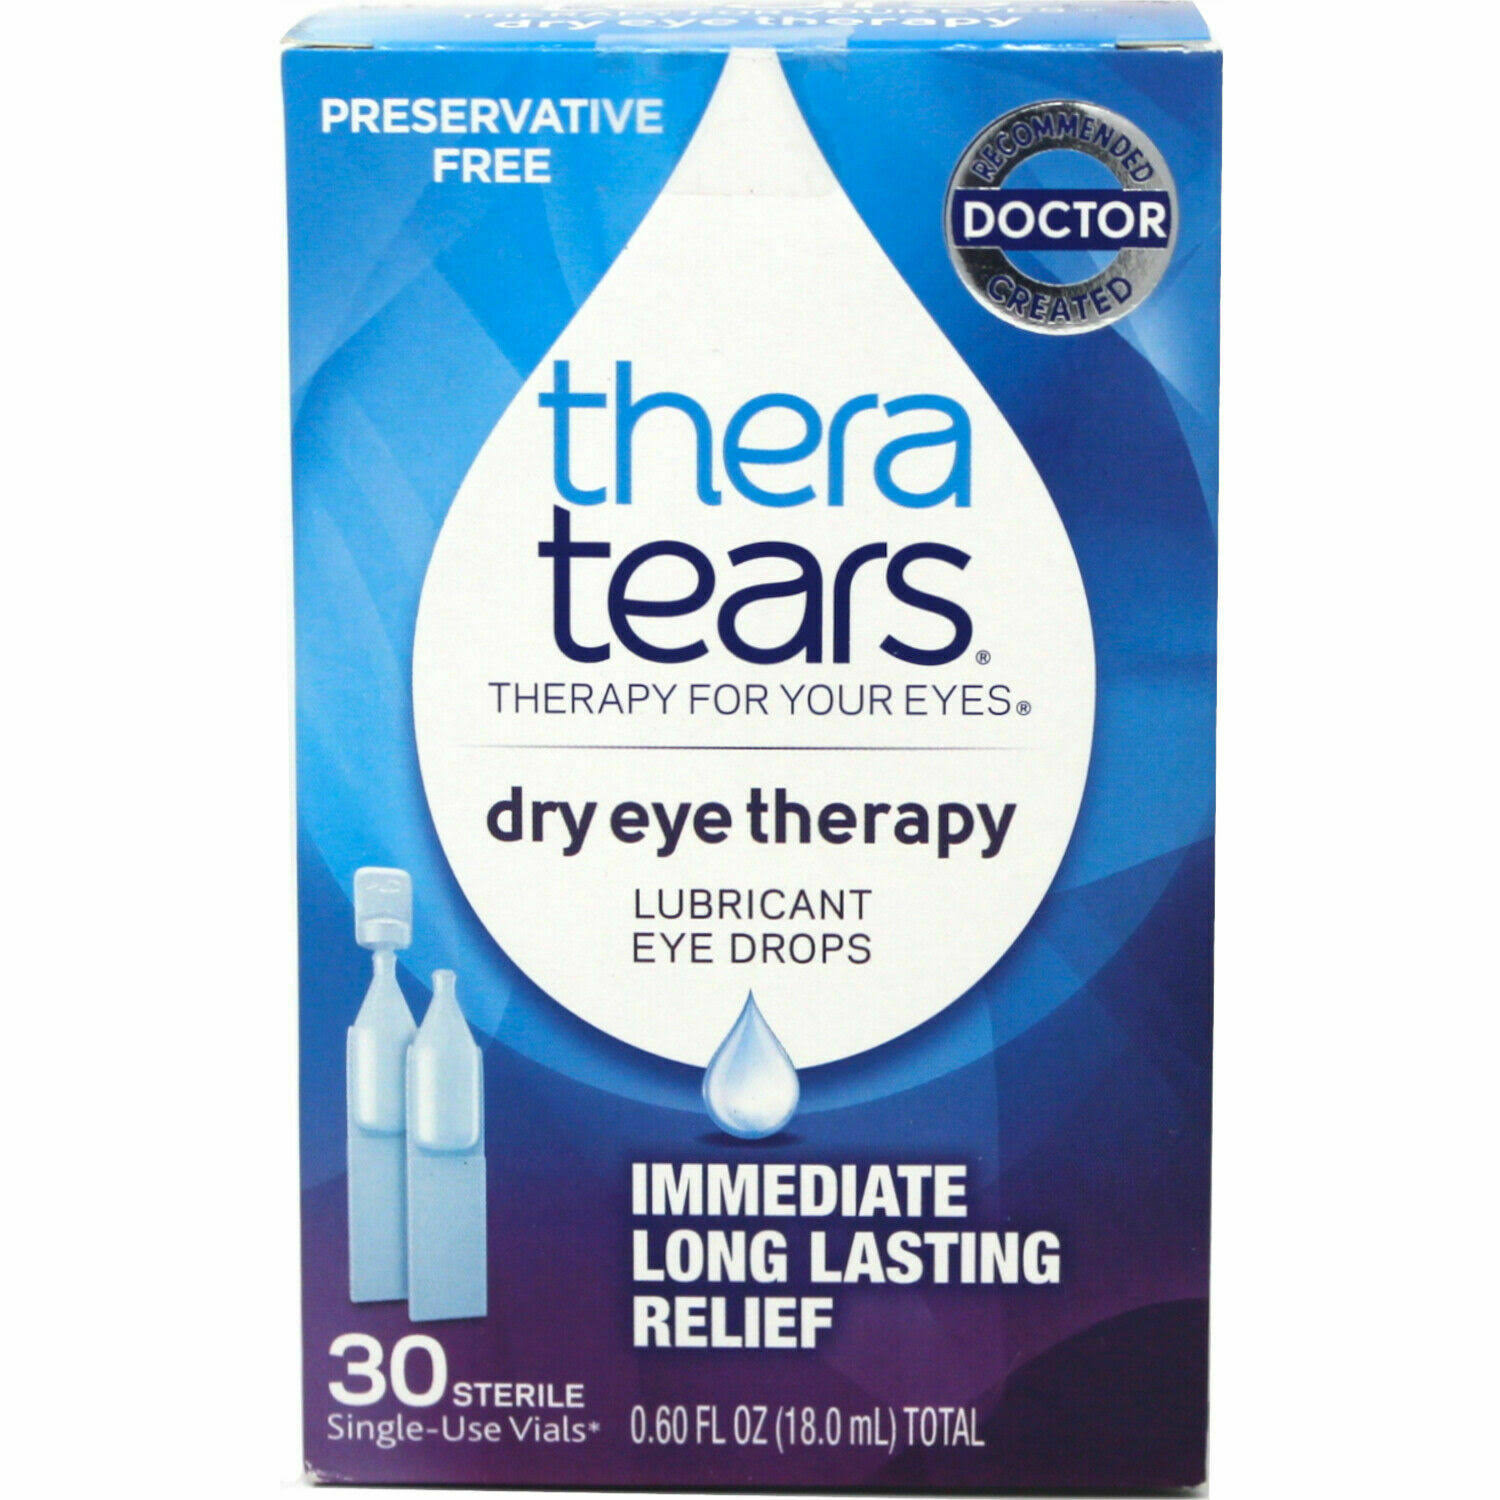 TheraTears Dry Eye Therapy Lubricant Eye Drops 30 Sterile Single-Use Vials